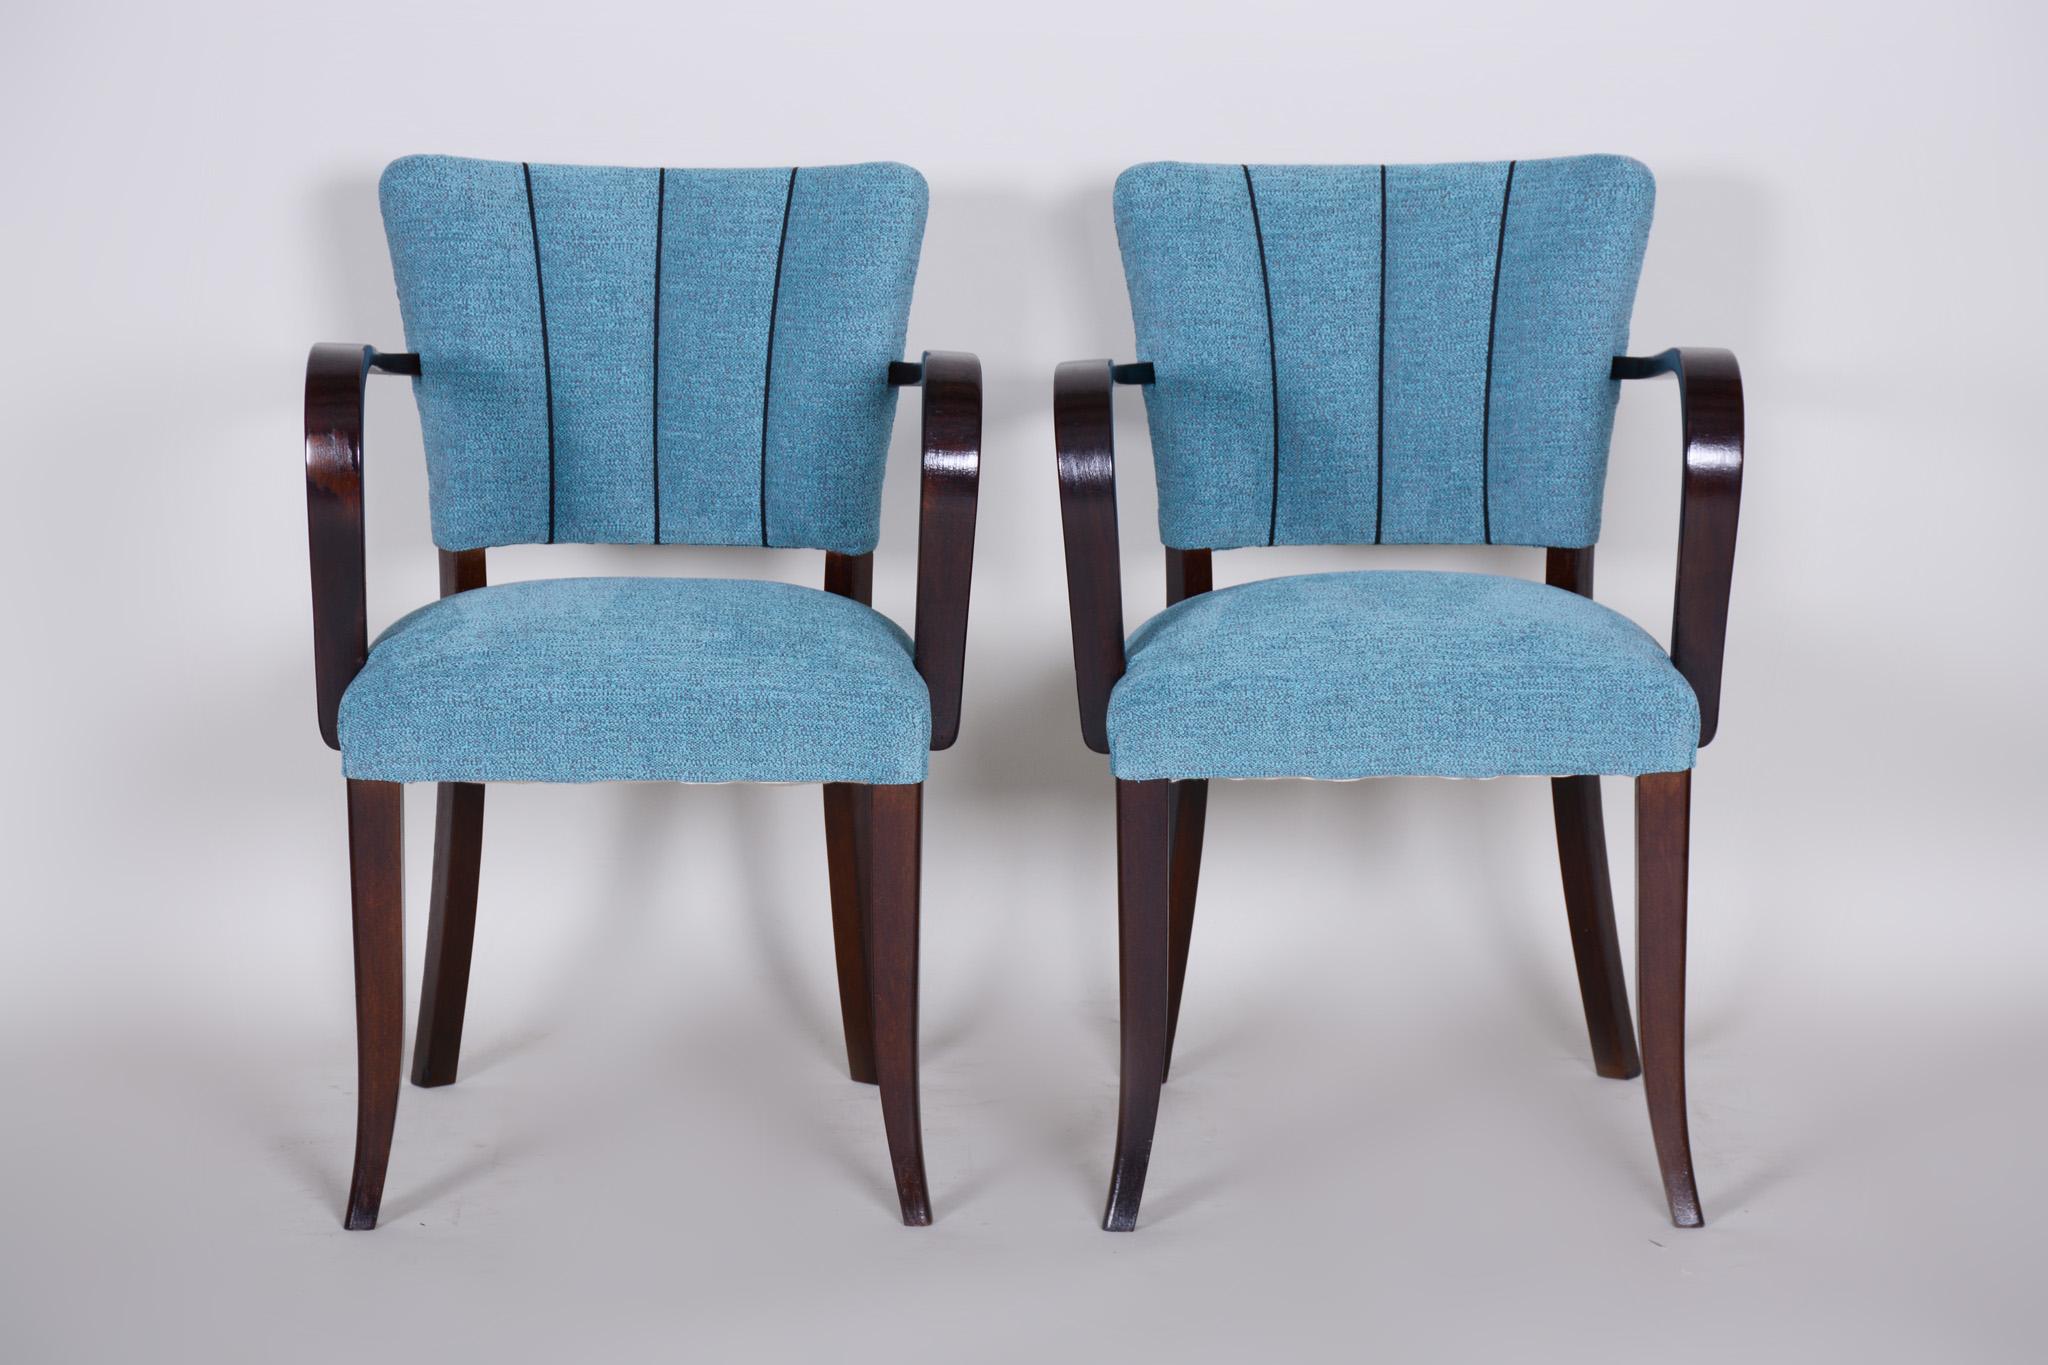 Shipping to any US port only for $290 USD

Pair of Art Deco armchairs
Source: France
Period: 1930-1939.
Material: Oak
Completely restored.
New professional upholstery and fabric.